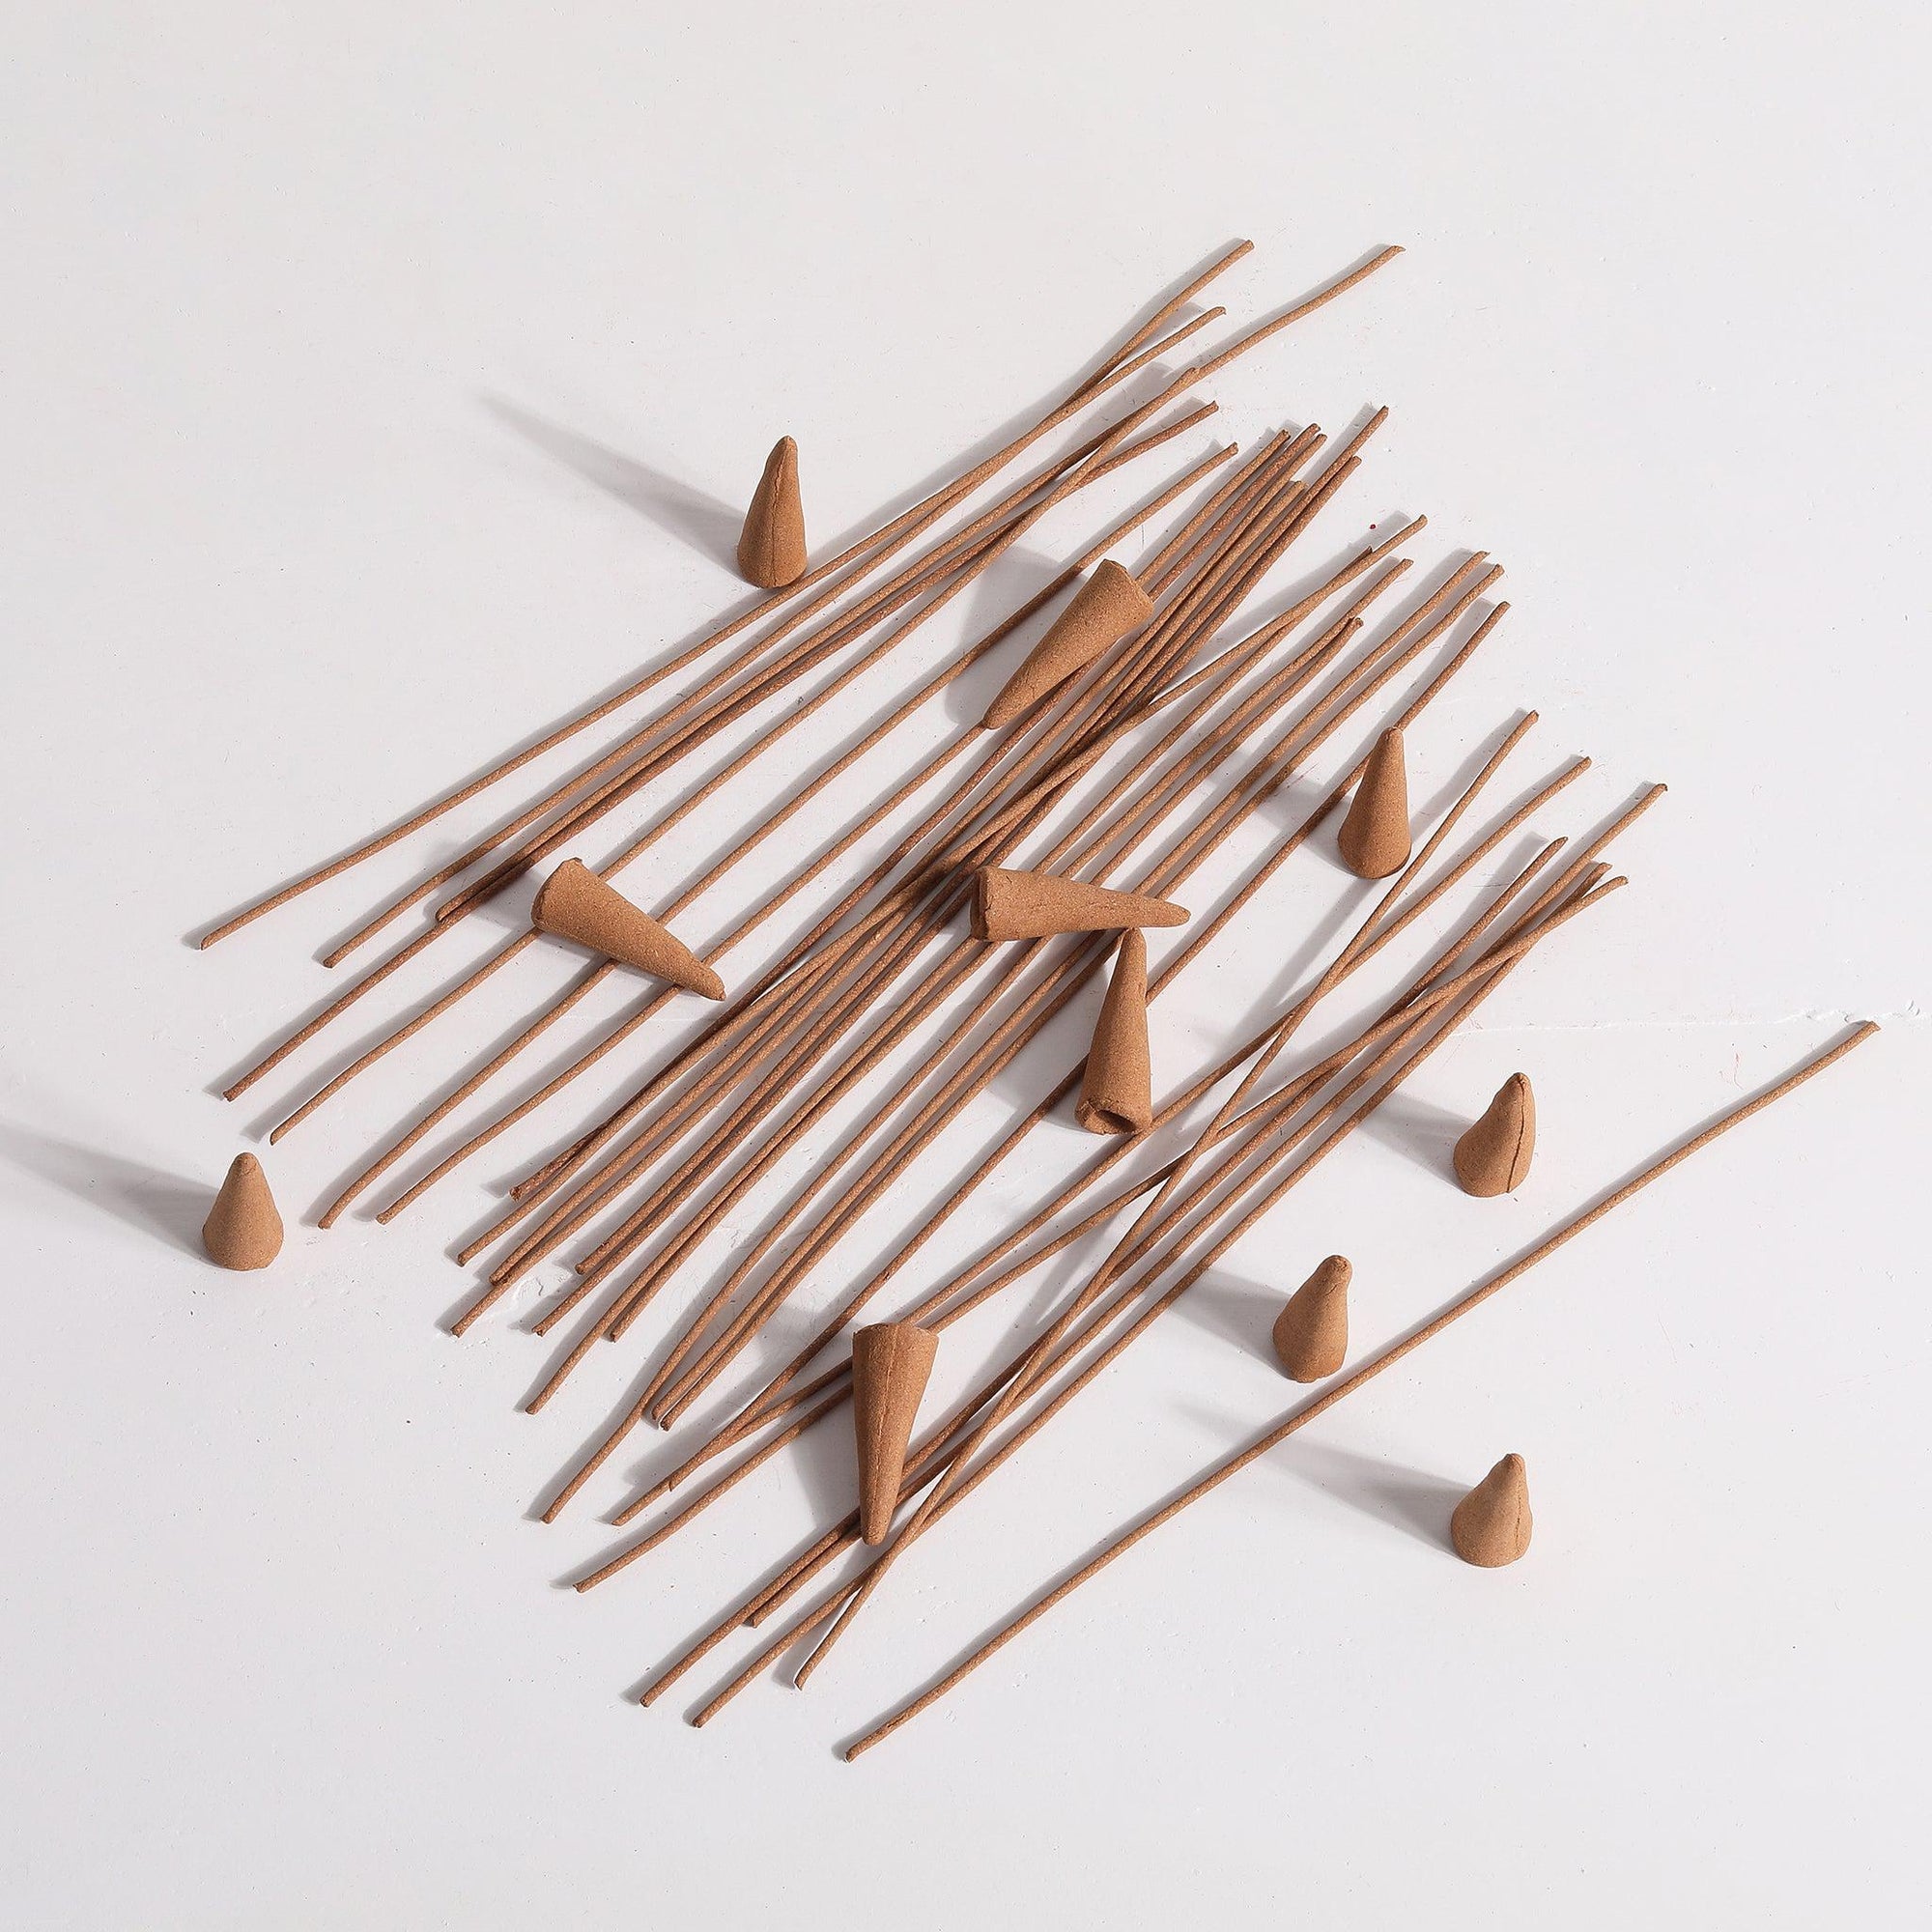 Handmade Incense sticks & cones by Kin Objects Evening Stroll -